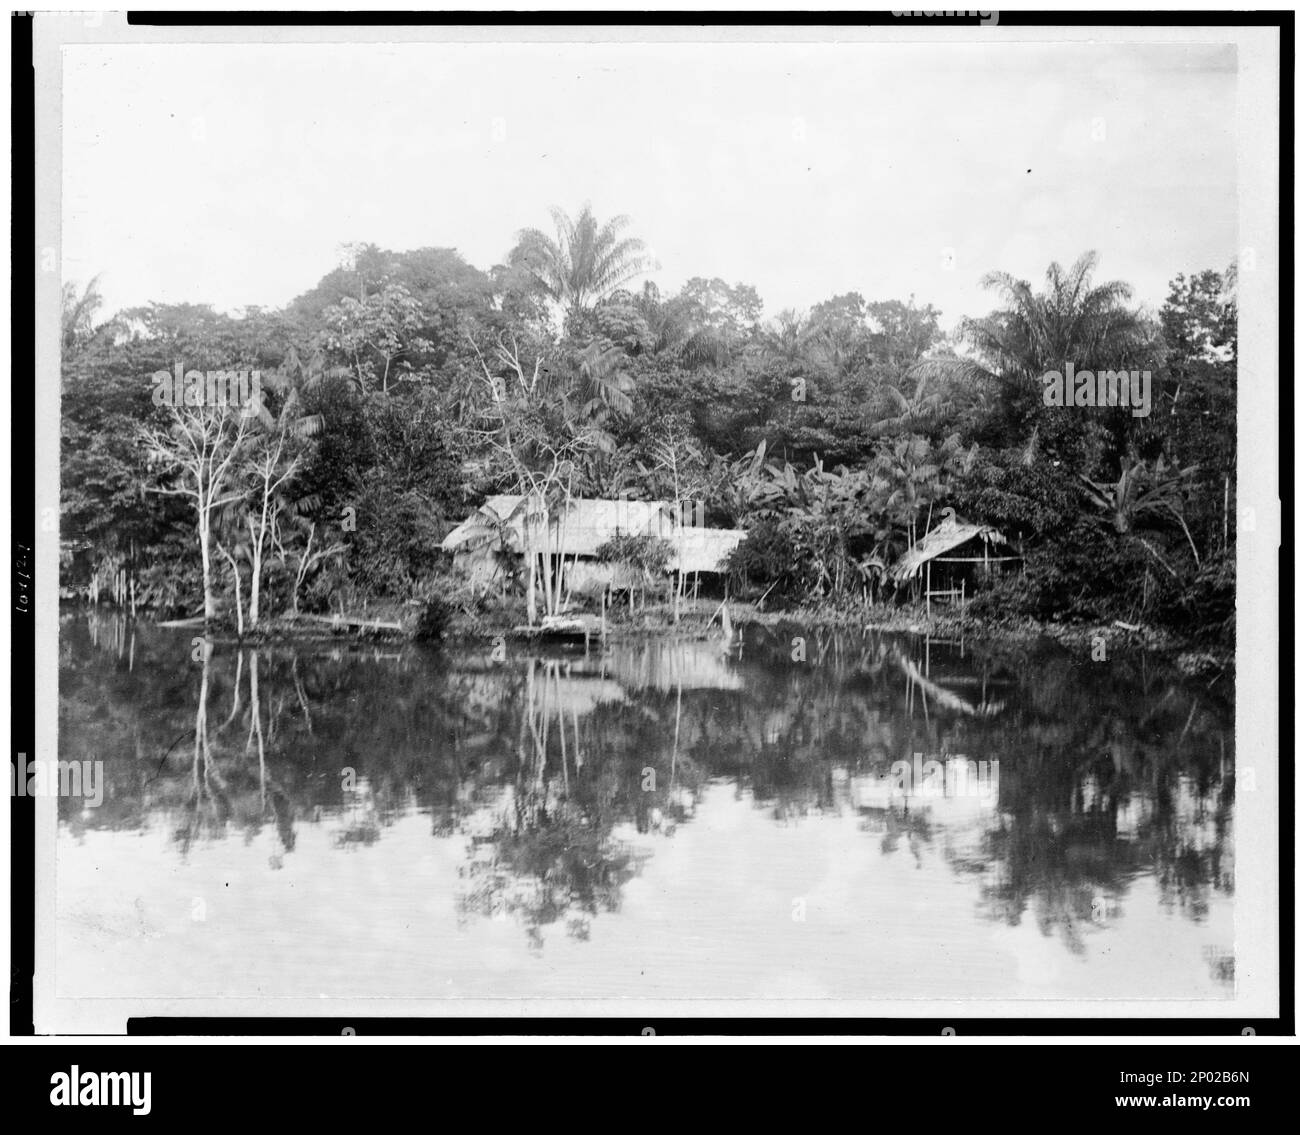 Indian hut in clearing on river bank, Brazil. Frank and Frances Carpenter Collection, Photo by The Booth Steamship Co, Ltd, Indians of South America,Brazil,Structures,1890-1930, Huts,Brazil,1890-1930, Tropical forests,Brazil,1890-1930, Rivers,Brazil,1890-1930. Stock Photo